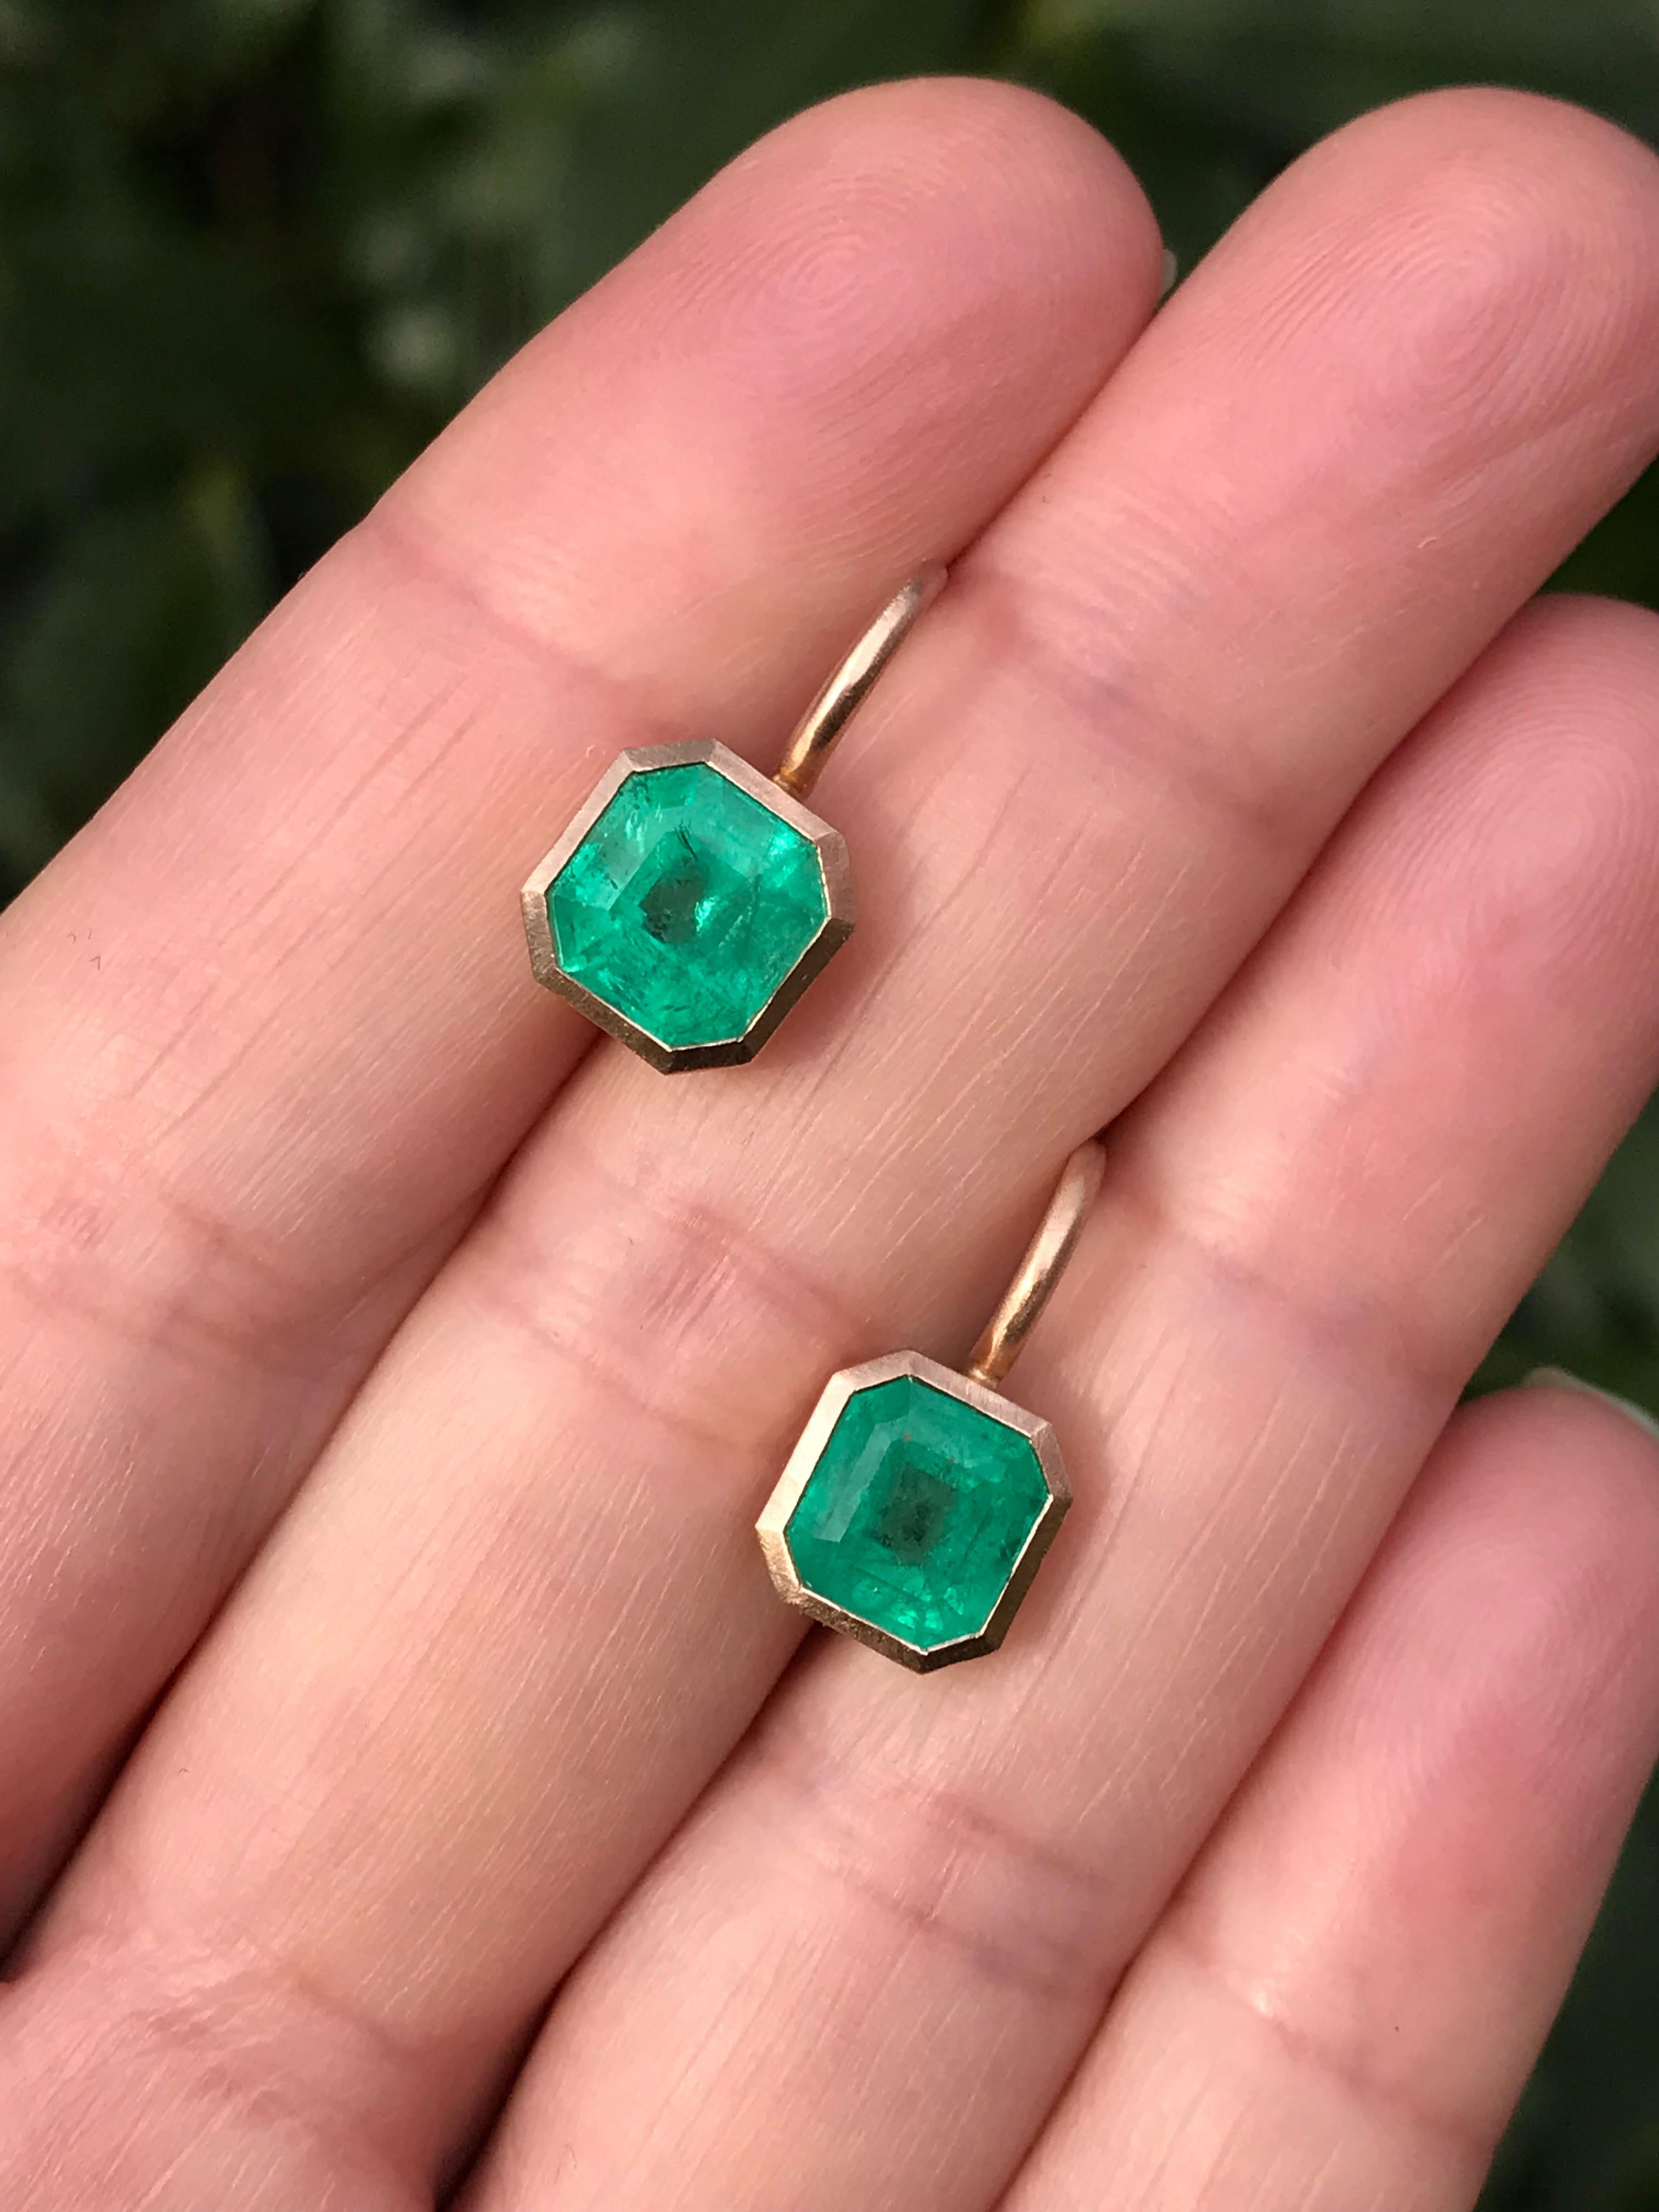 Dalben design  18k rose gold matte finishing earrings with two bezel-set emerald faceted cut  Colombian emerald weight 4,03 carats .
They are not a perfect pair ,  
Bezel stone dimensions :
 8,6 x 8,2 mm   8,9 x 8,6 mm
height with leverback 17